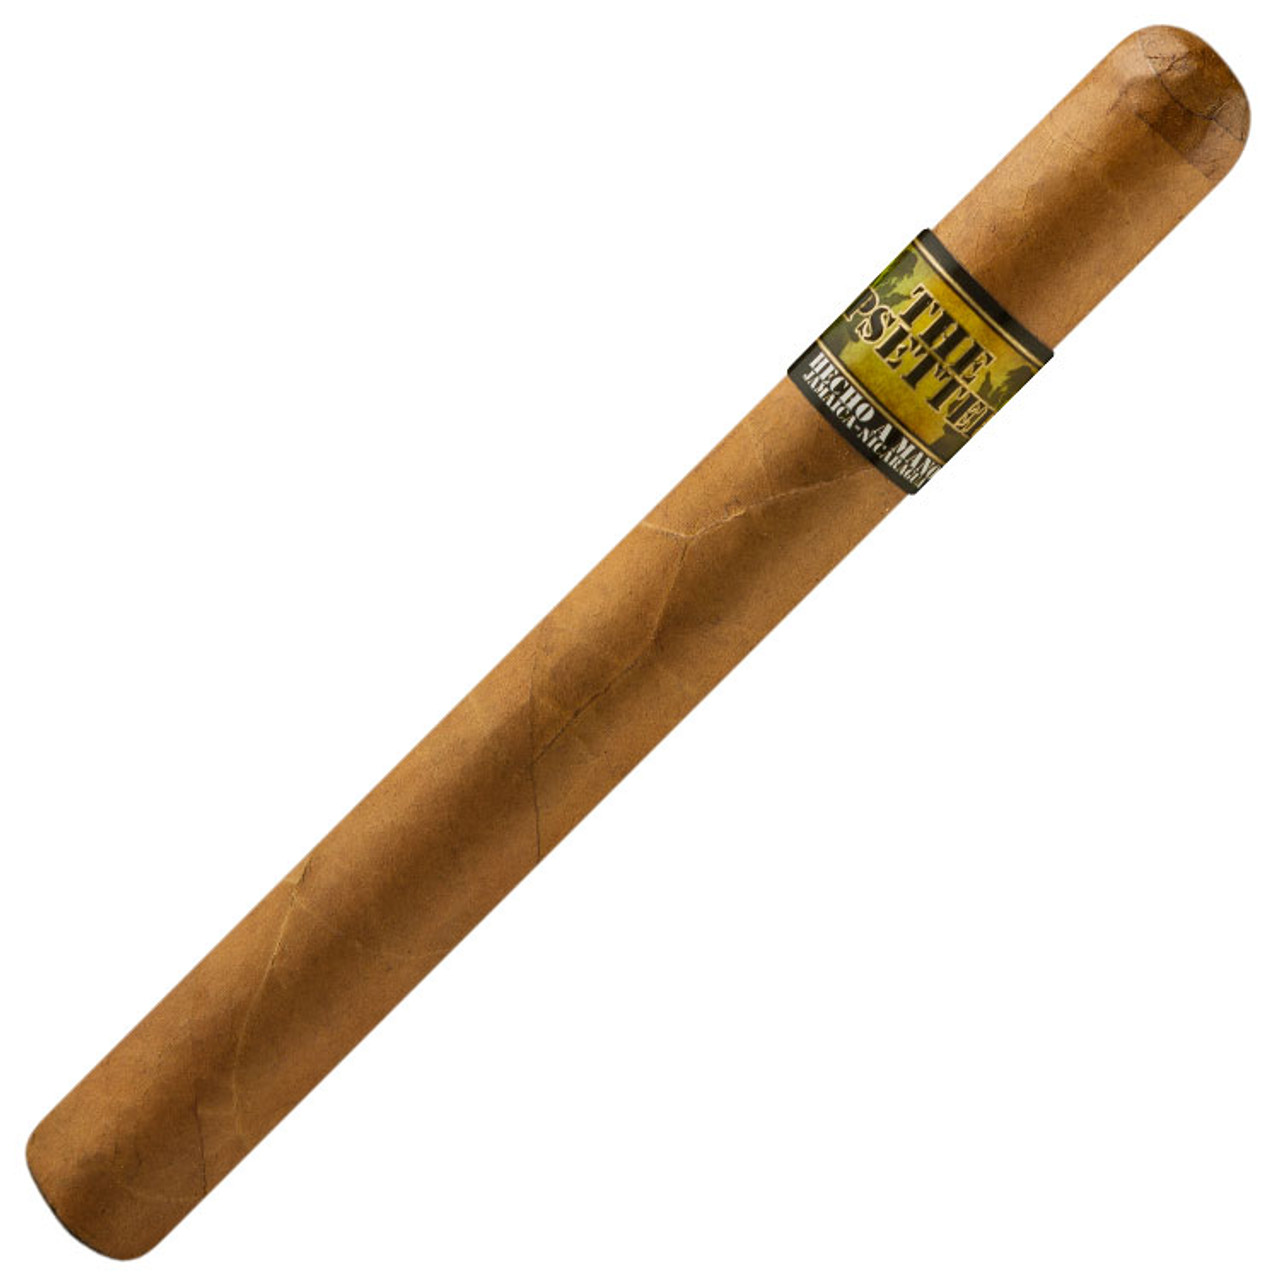 Foundation The Upsetters Rock Steady Cigars - 4.5 x 54 (Box of 20)